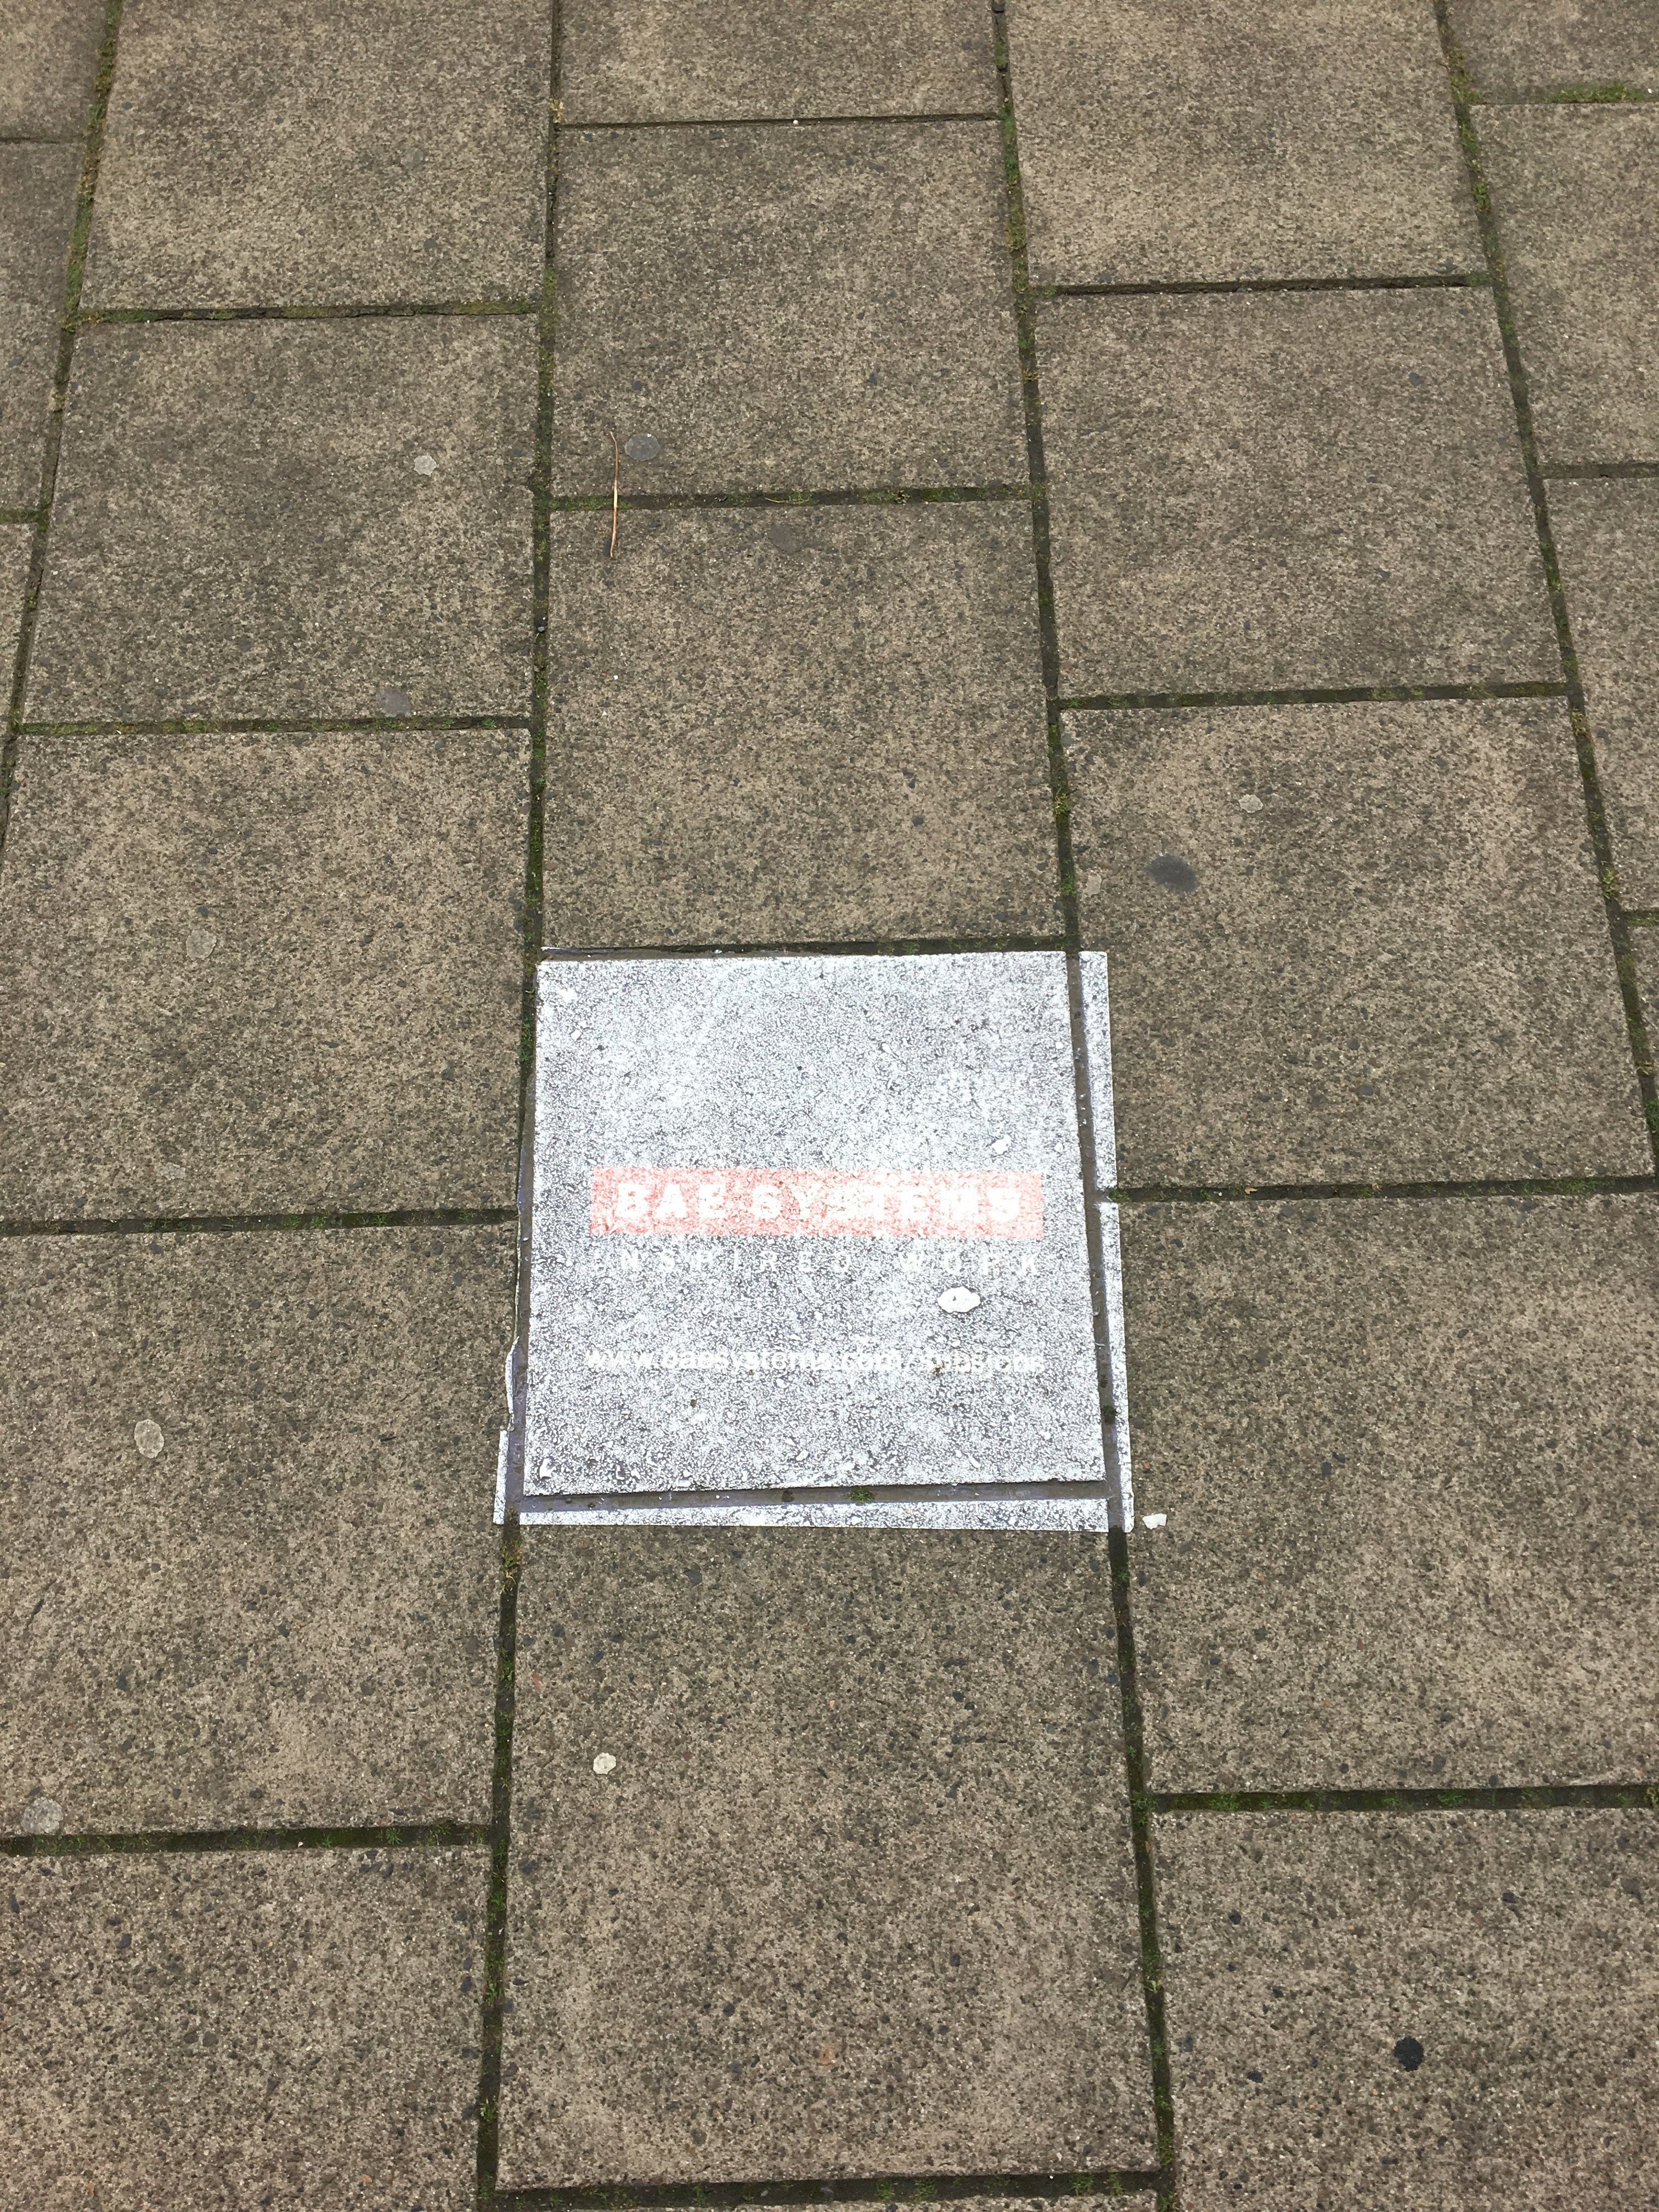 BAE Systems has penetrated every part of Barrow-in-Furness. Here its logo has been sprayed Banksy-style on the pavement in central Barrow. Image by Matt Kennard. United Kingdom, 2017.